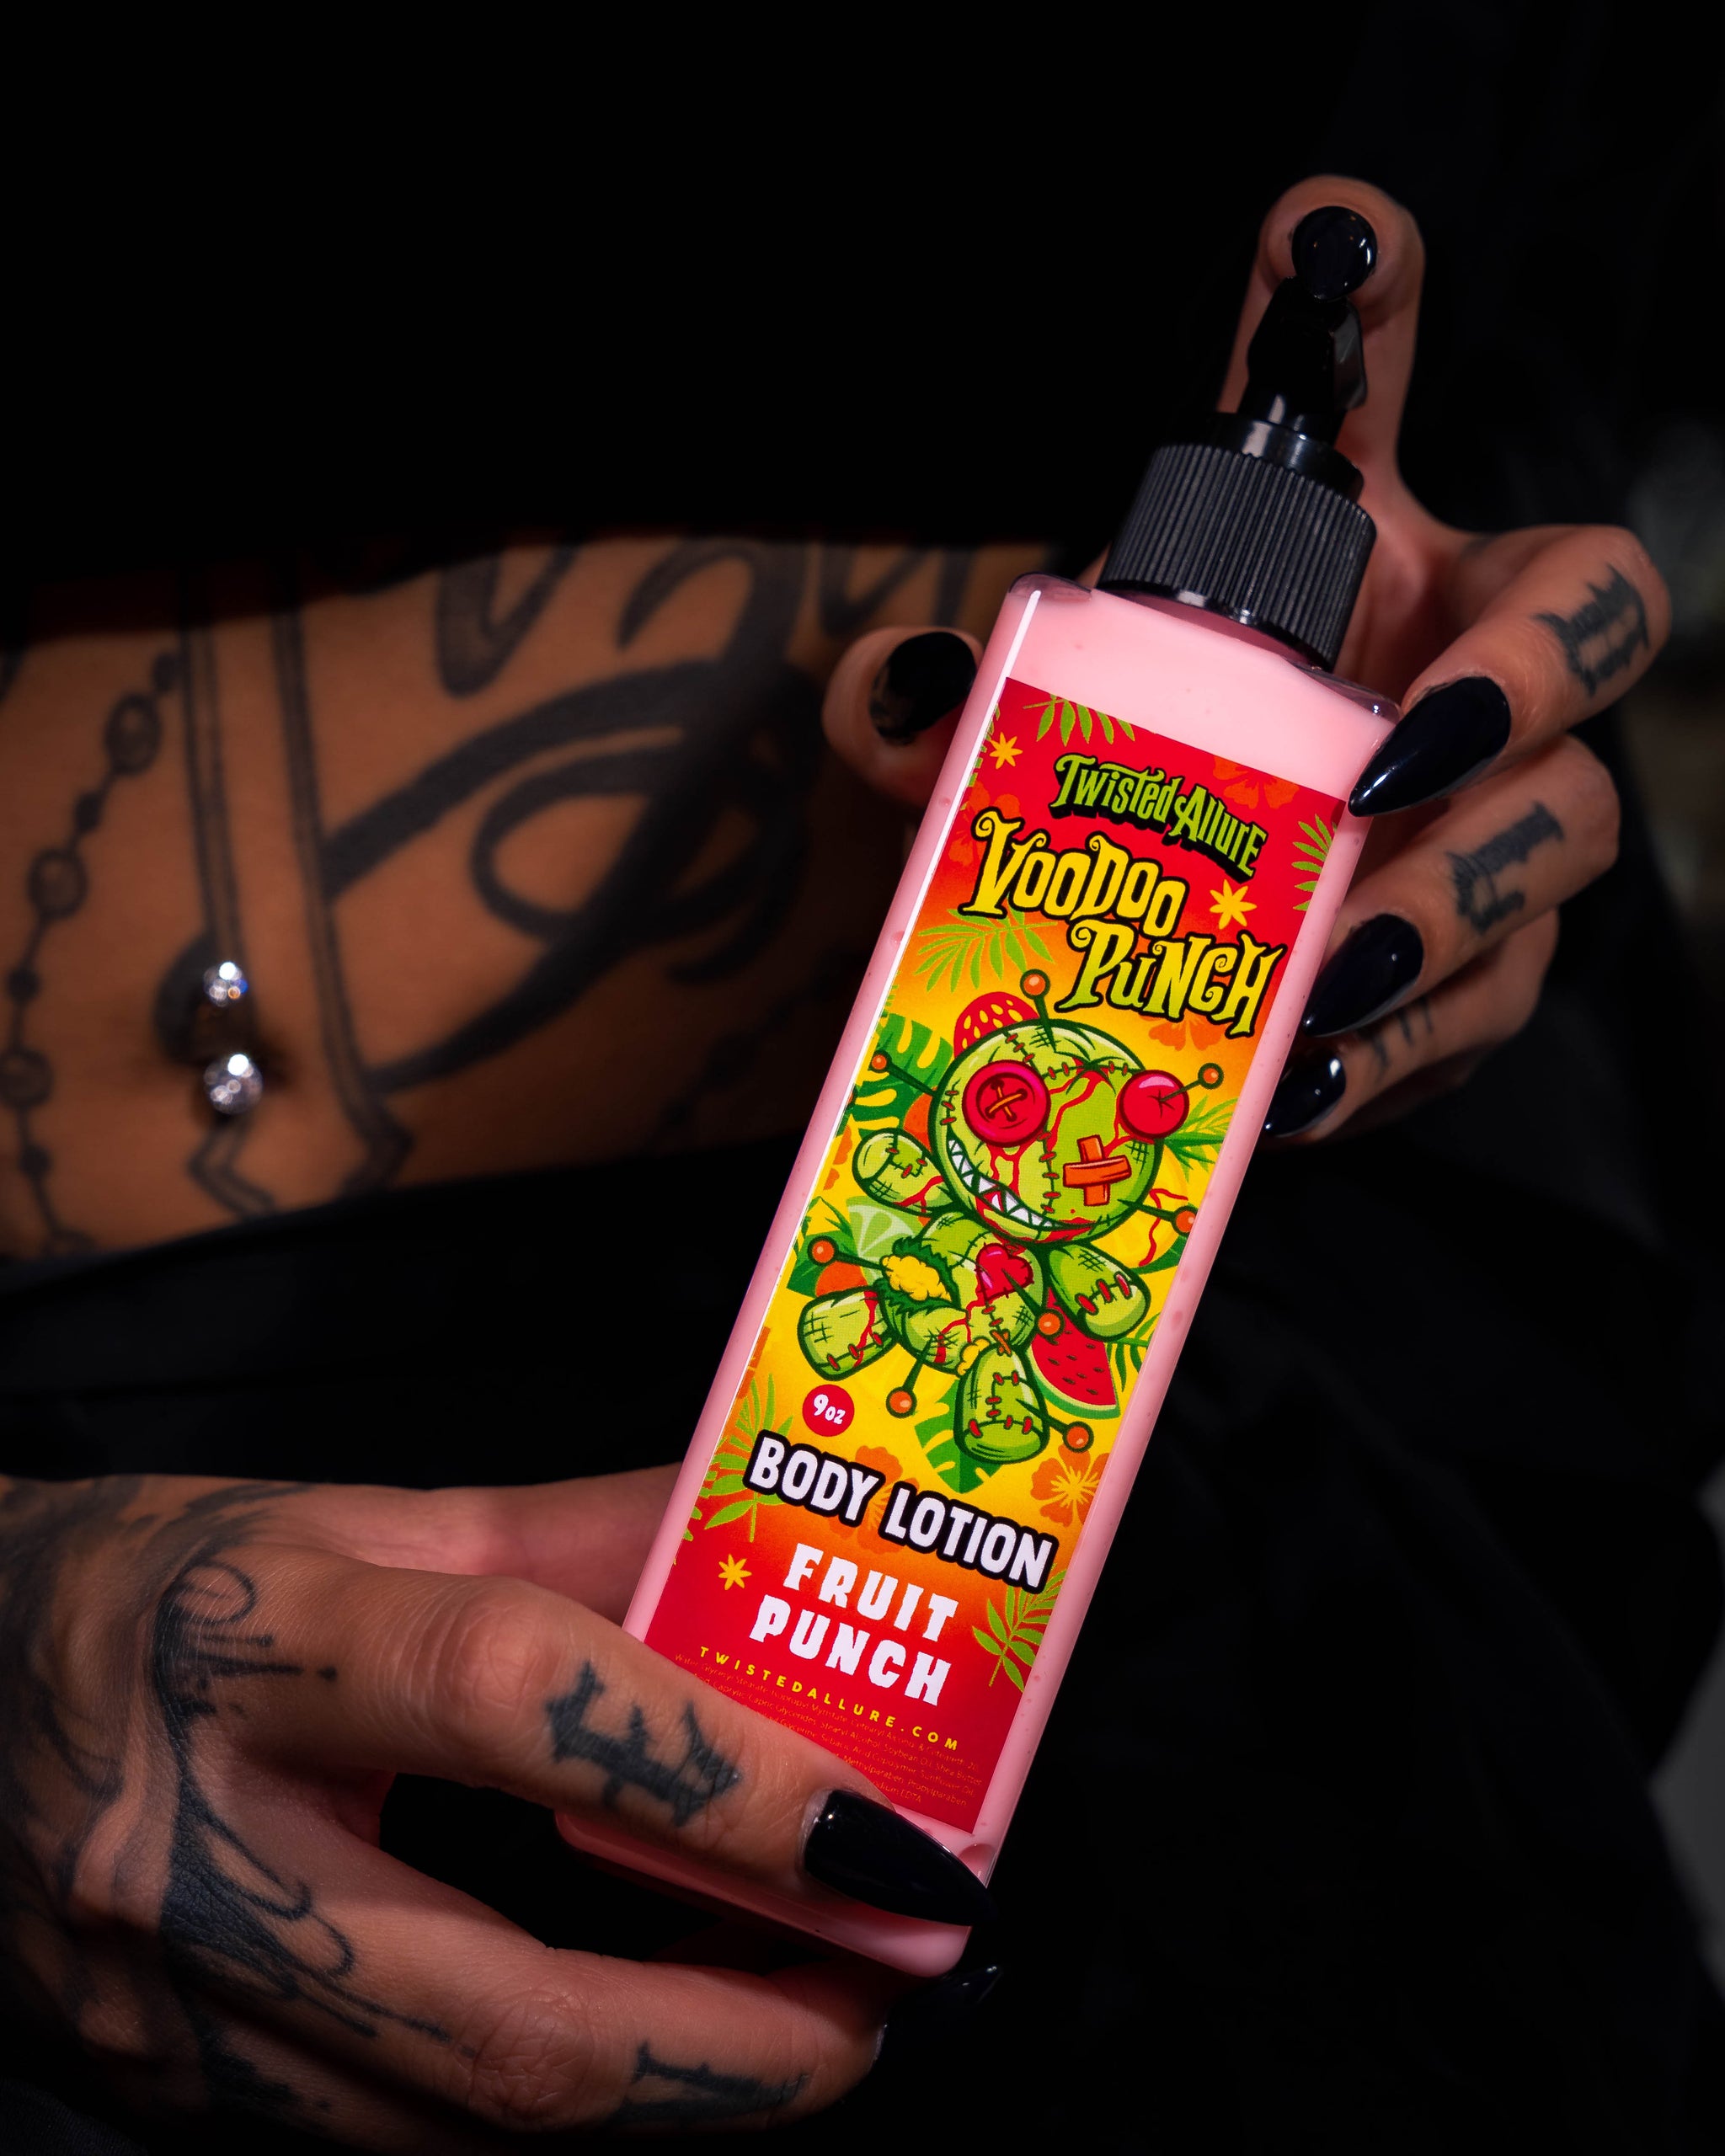 VooDoo Punch Body Lotion (Fruit Punch)